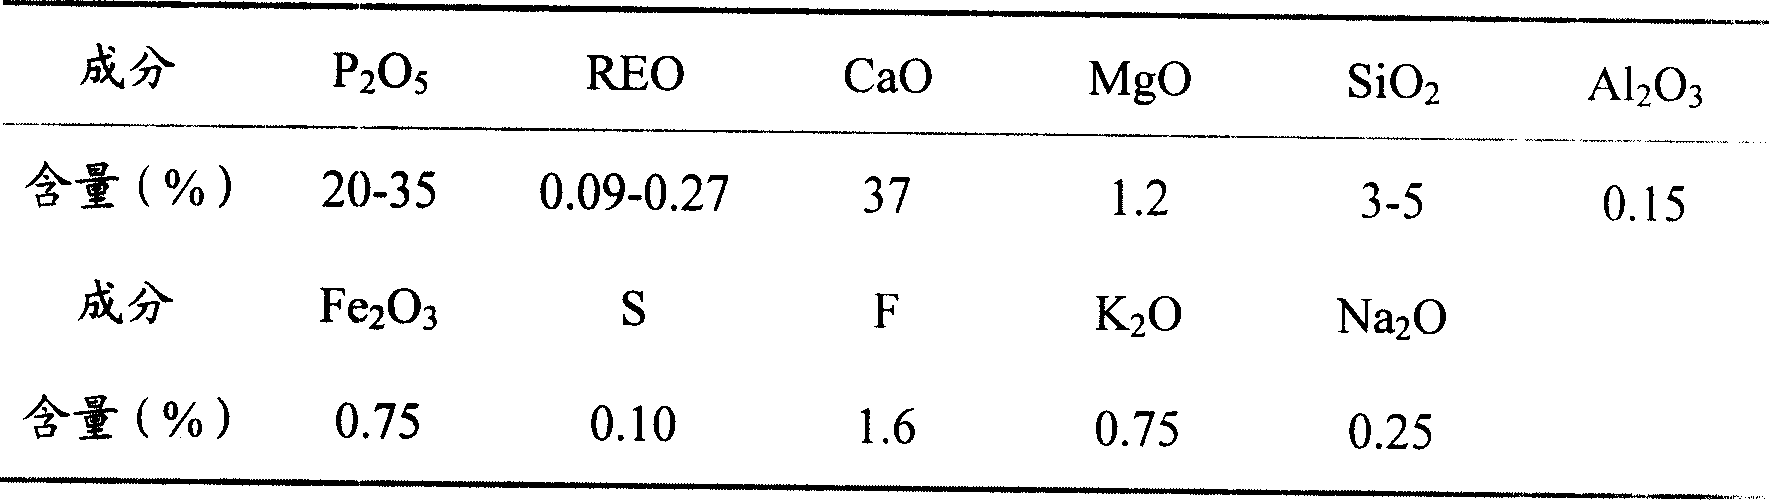 Technique for comprehensive utilization clean production of phosphorus block ore and extracting rare earth form the phosphorus block ore